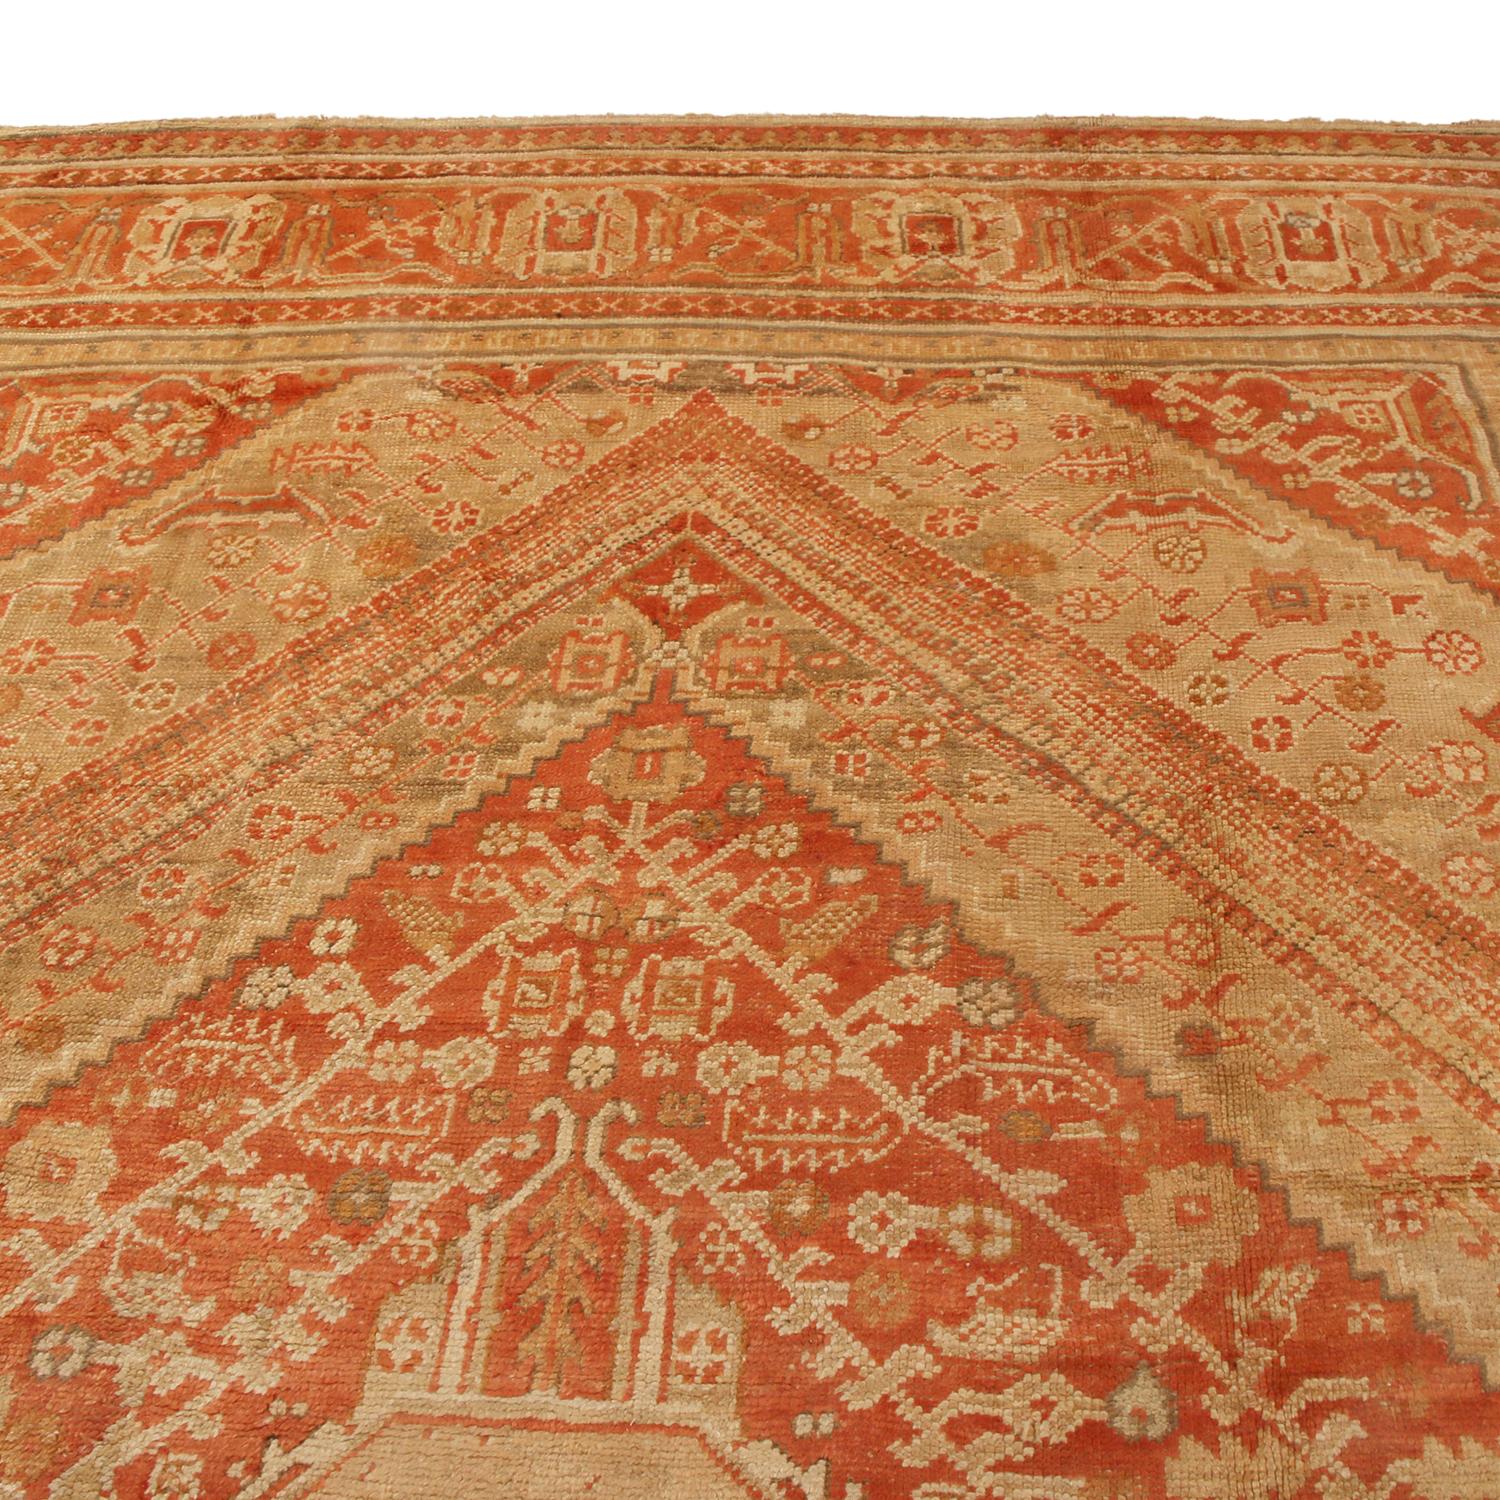 Antique Oushak Beige and Red Wool Rug with Medallion Field Design by Rug & Kilim In Good Condition For Sale In Long Island City, NY